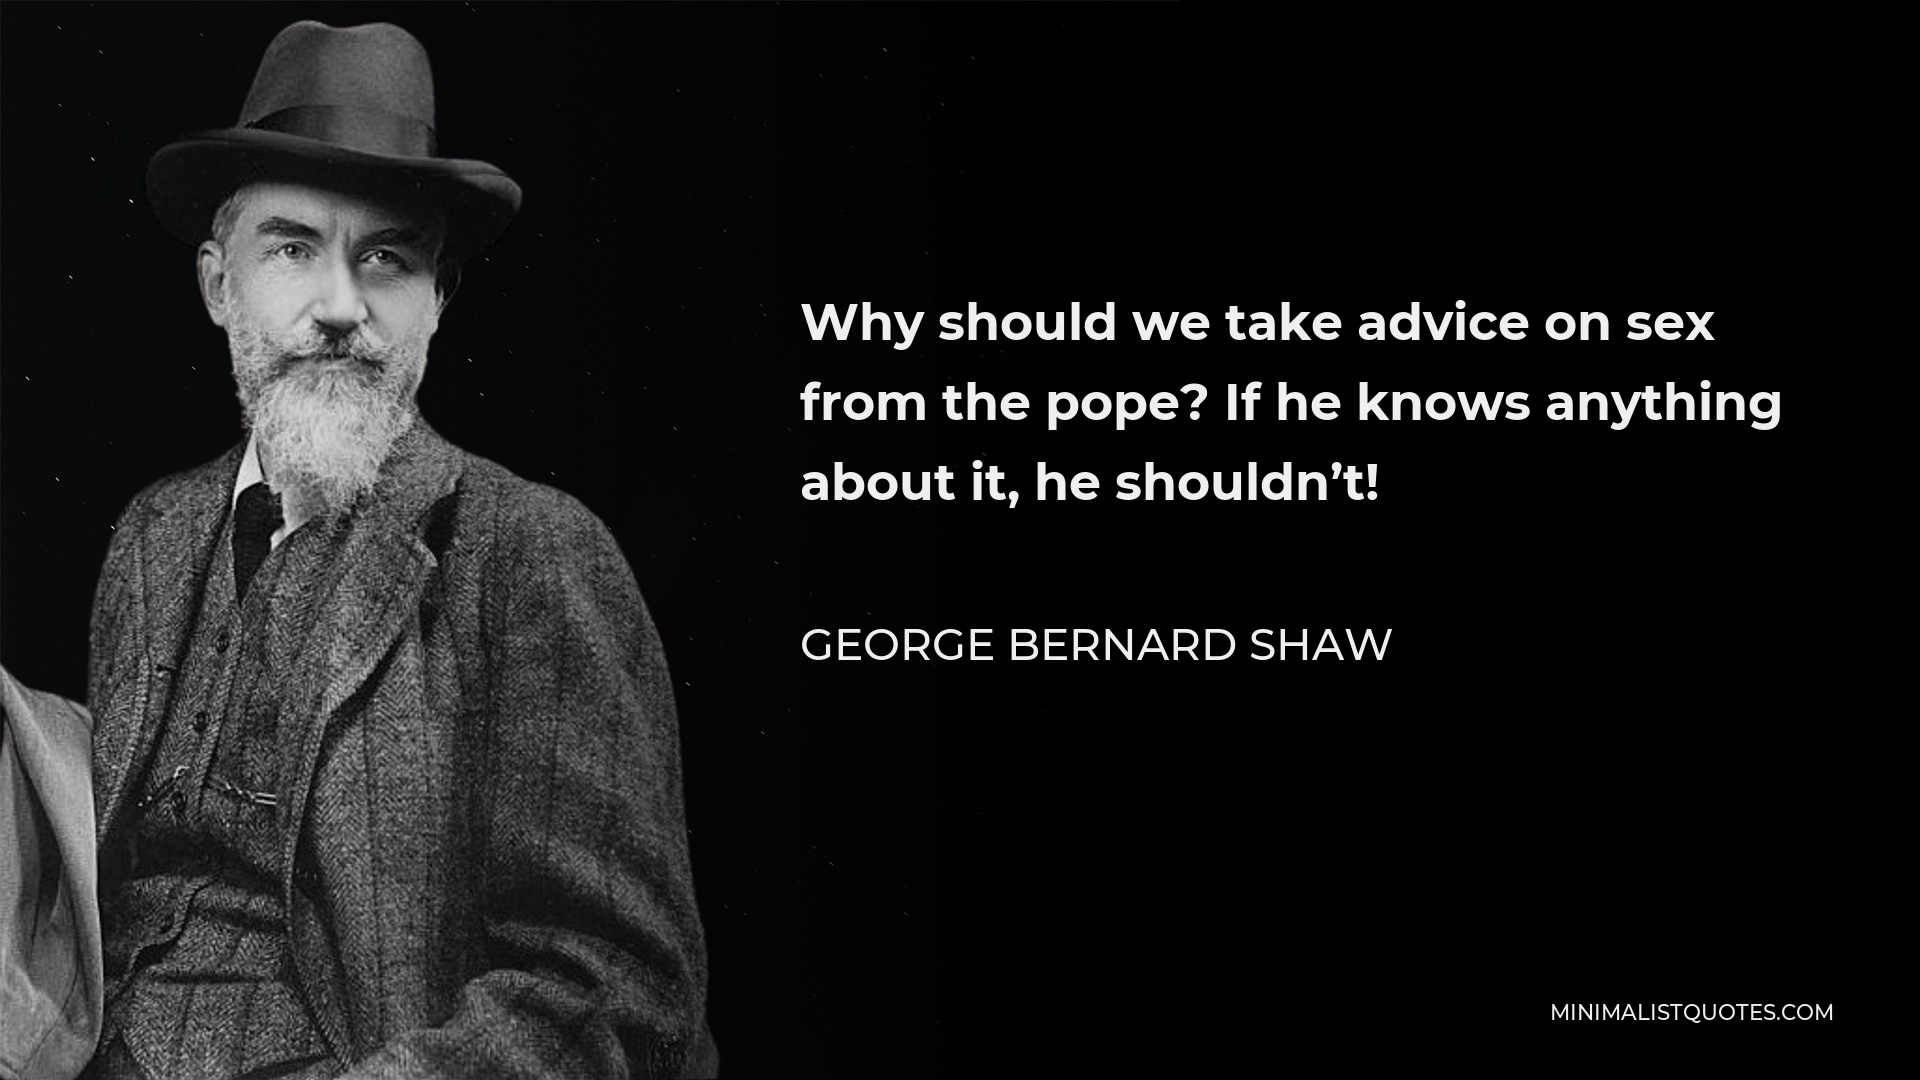 George Bernard Shaw Quote - Why should we take advice on sex from the pope? If he knows anything about it, he shouldn’t!